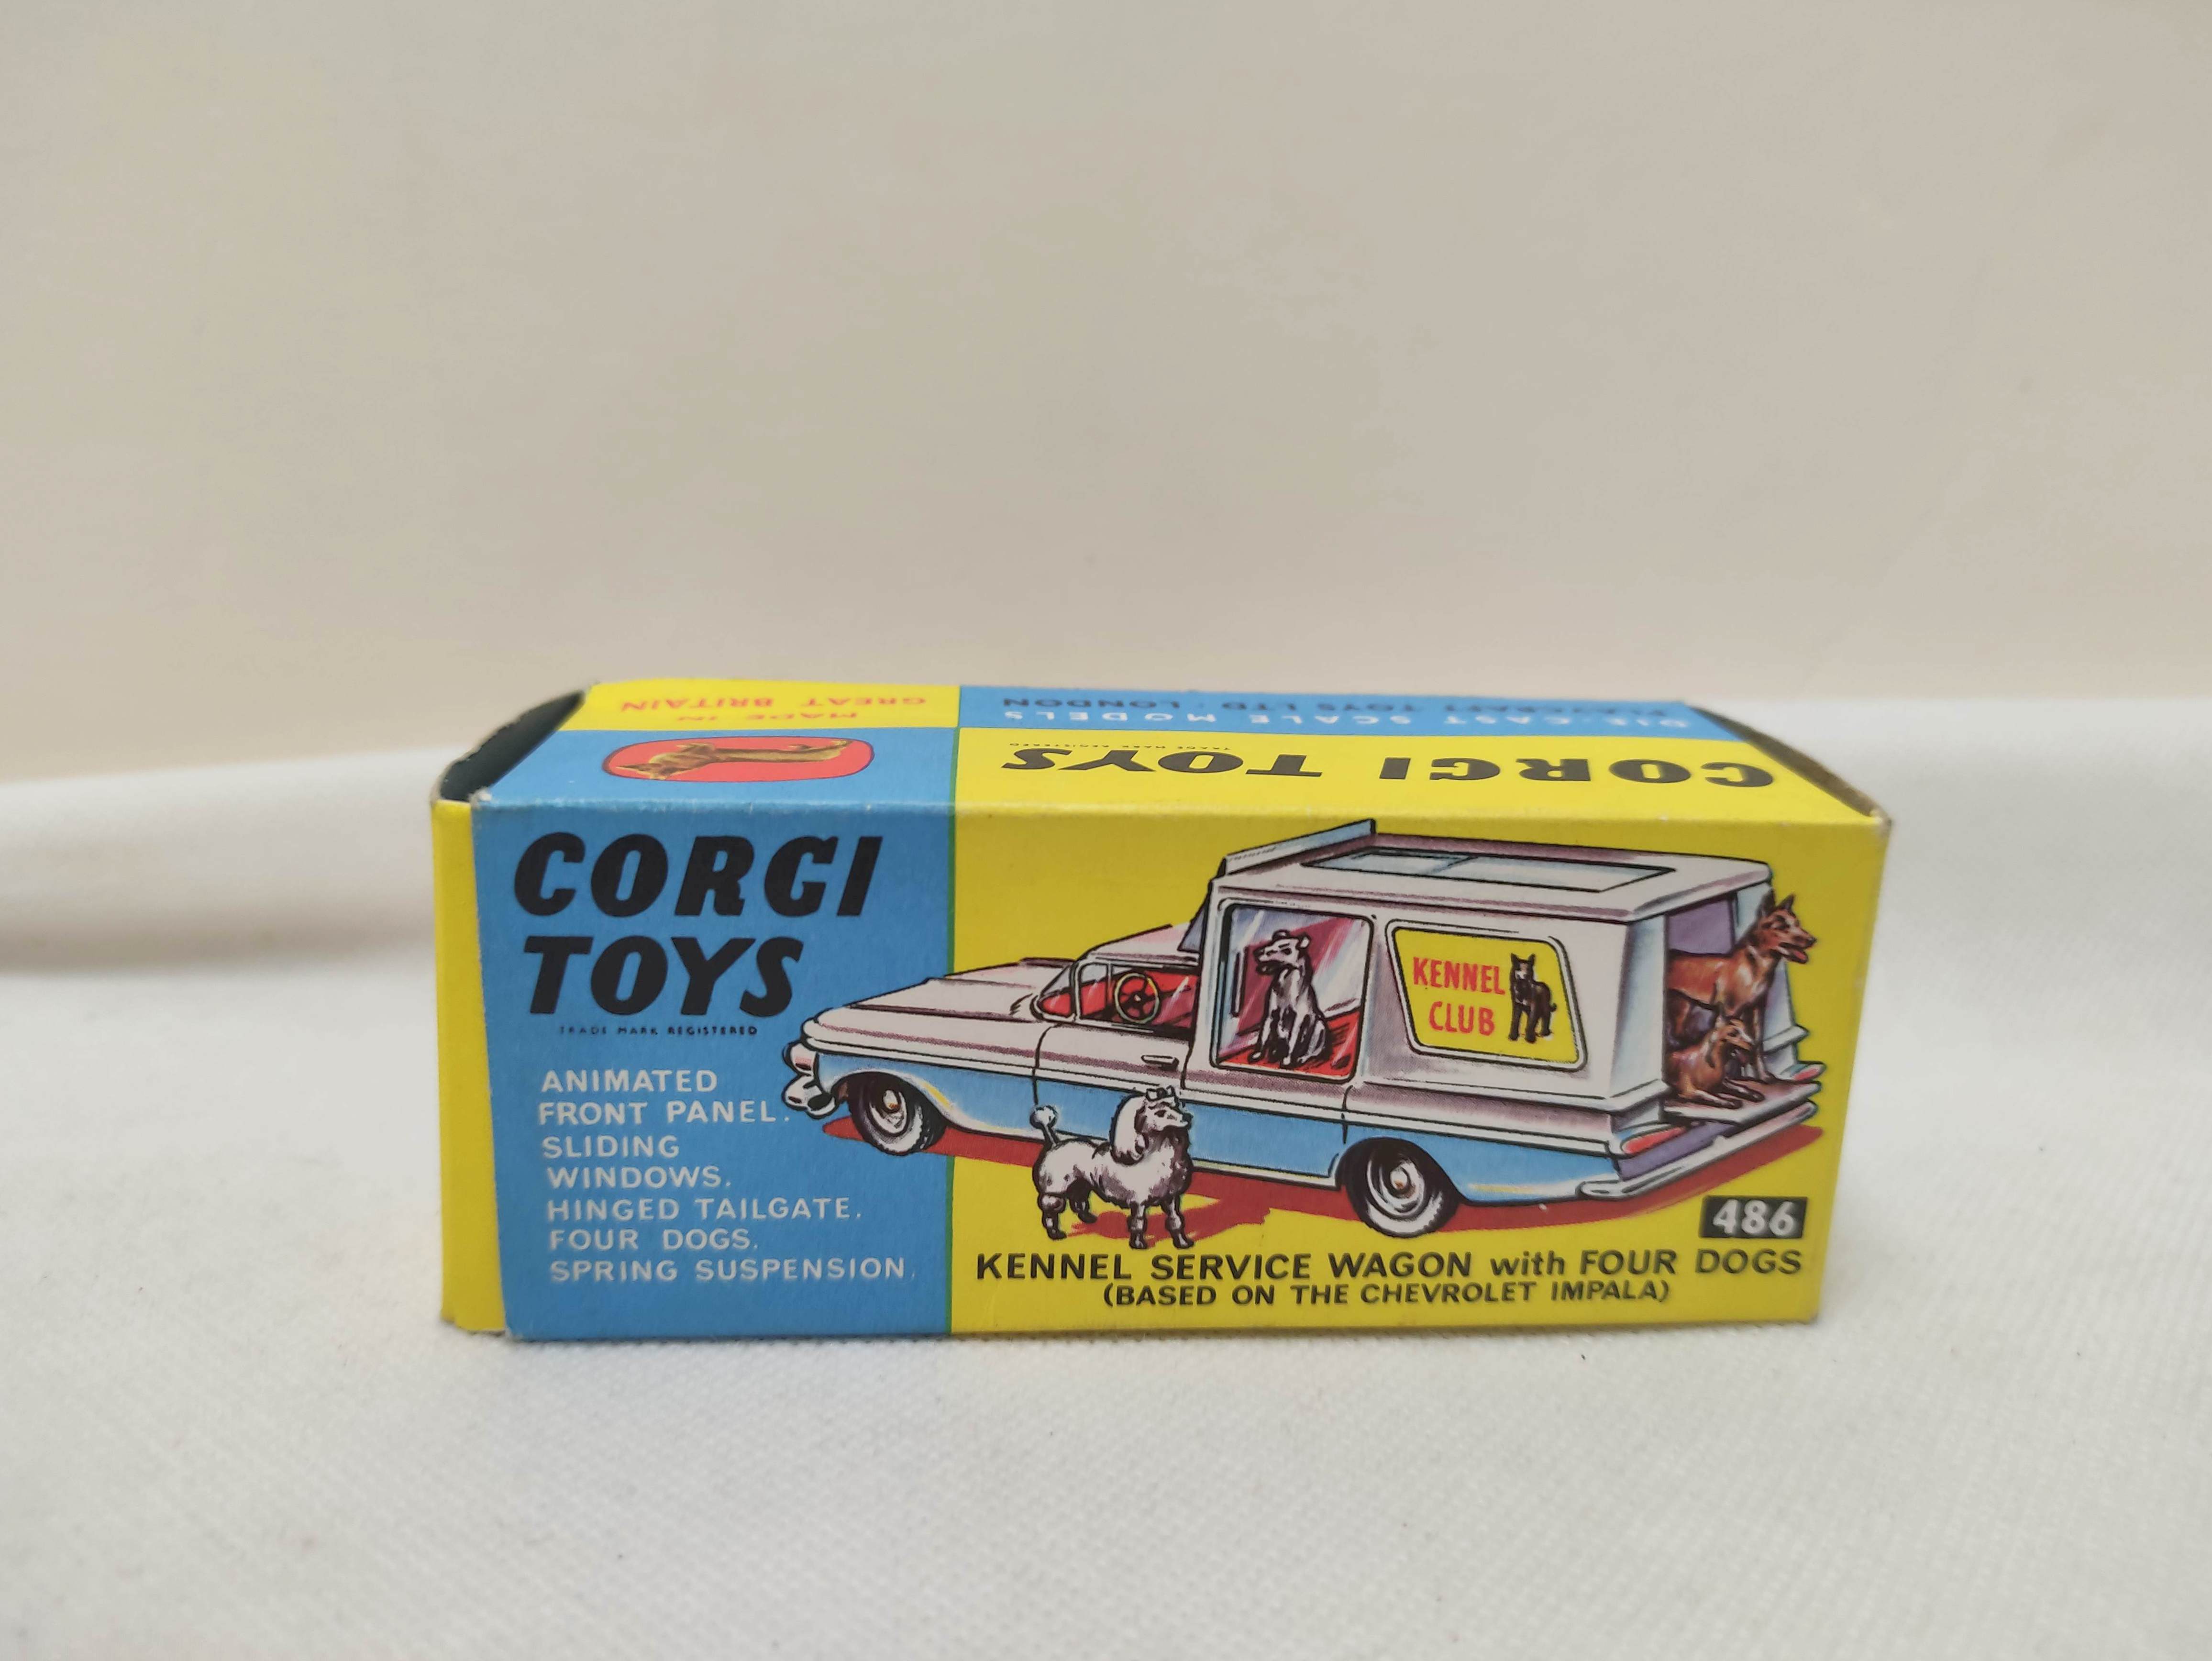 Corgi Toys model 486 Kennel Service Wagon with four dogs based off the Chevrolet Impala. Complete - Image 2 of 7